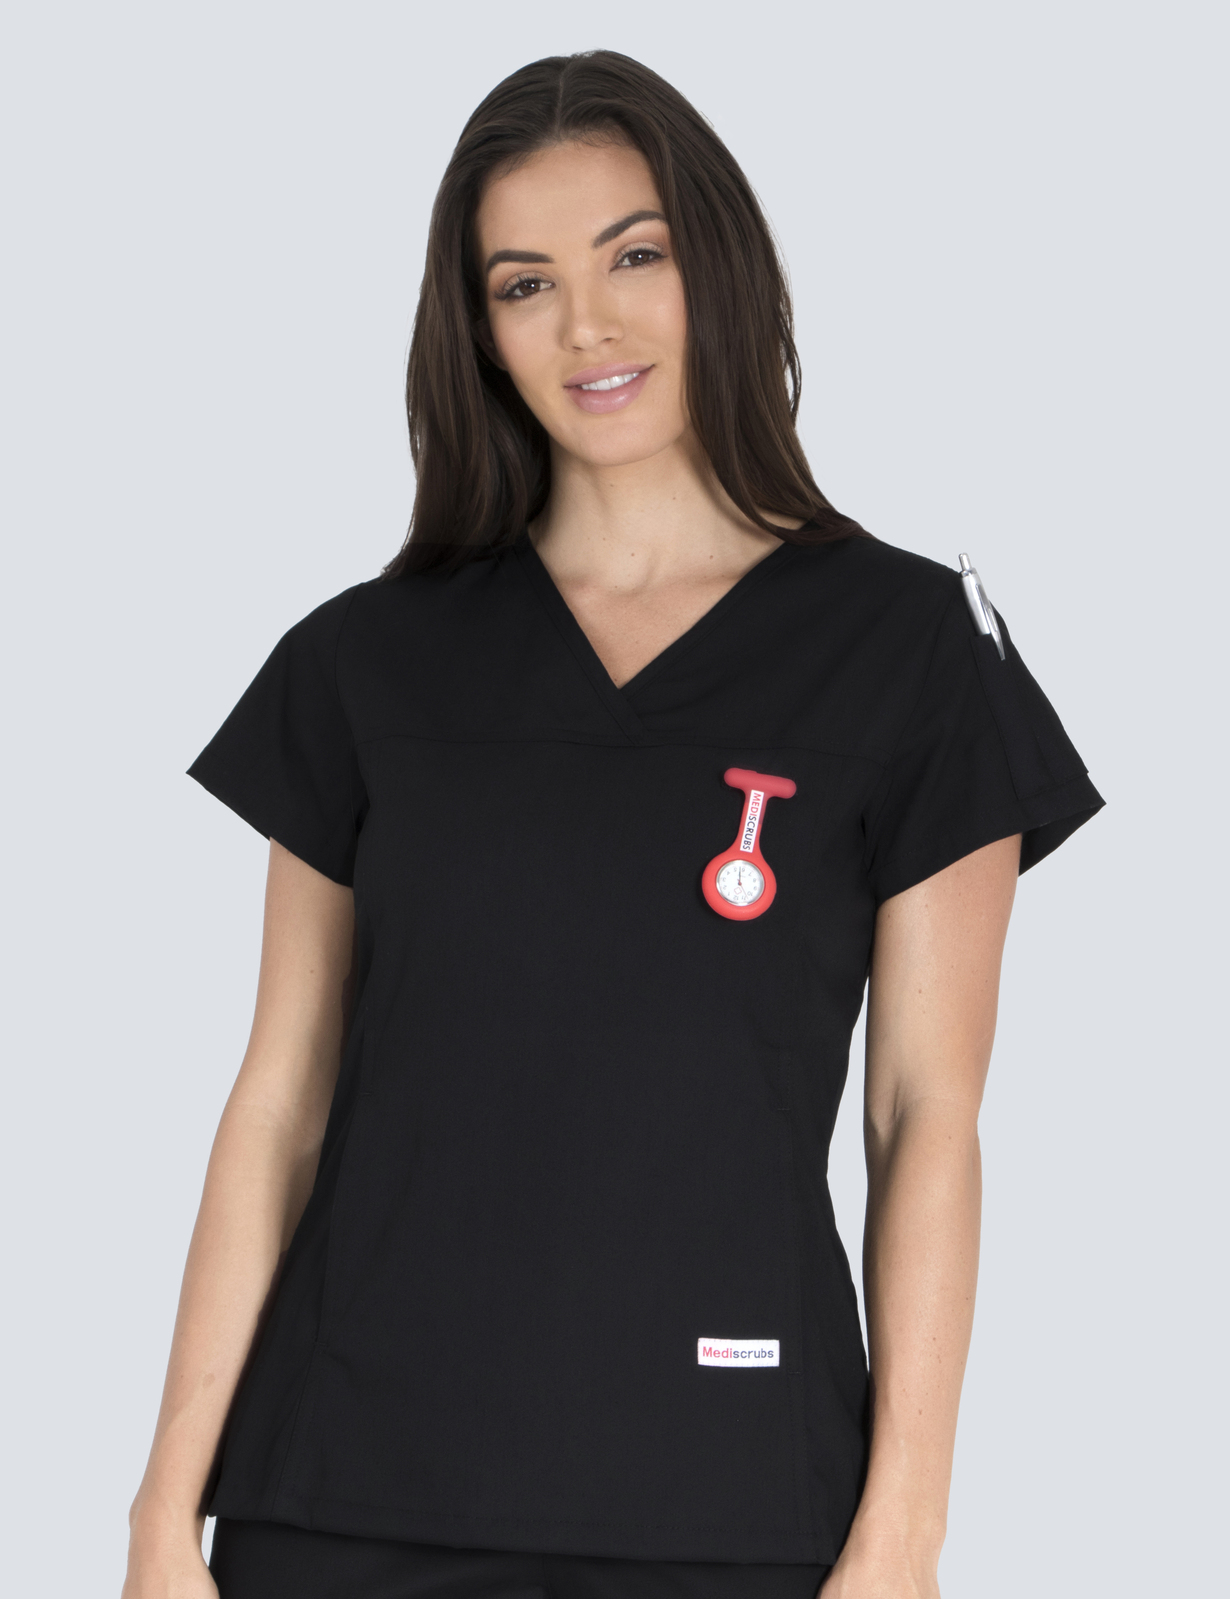 North Shore Private Hospital Nuclear Medicine Technician Uniform Top Only Bundle (Women's Fit Solid  Top in Black + Logo)